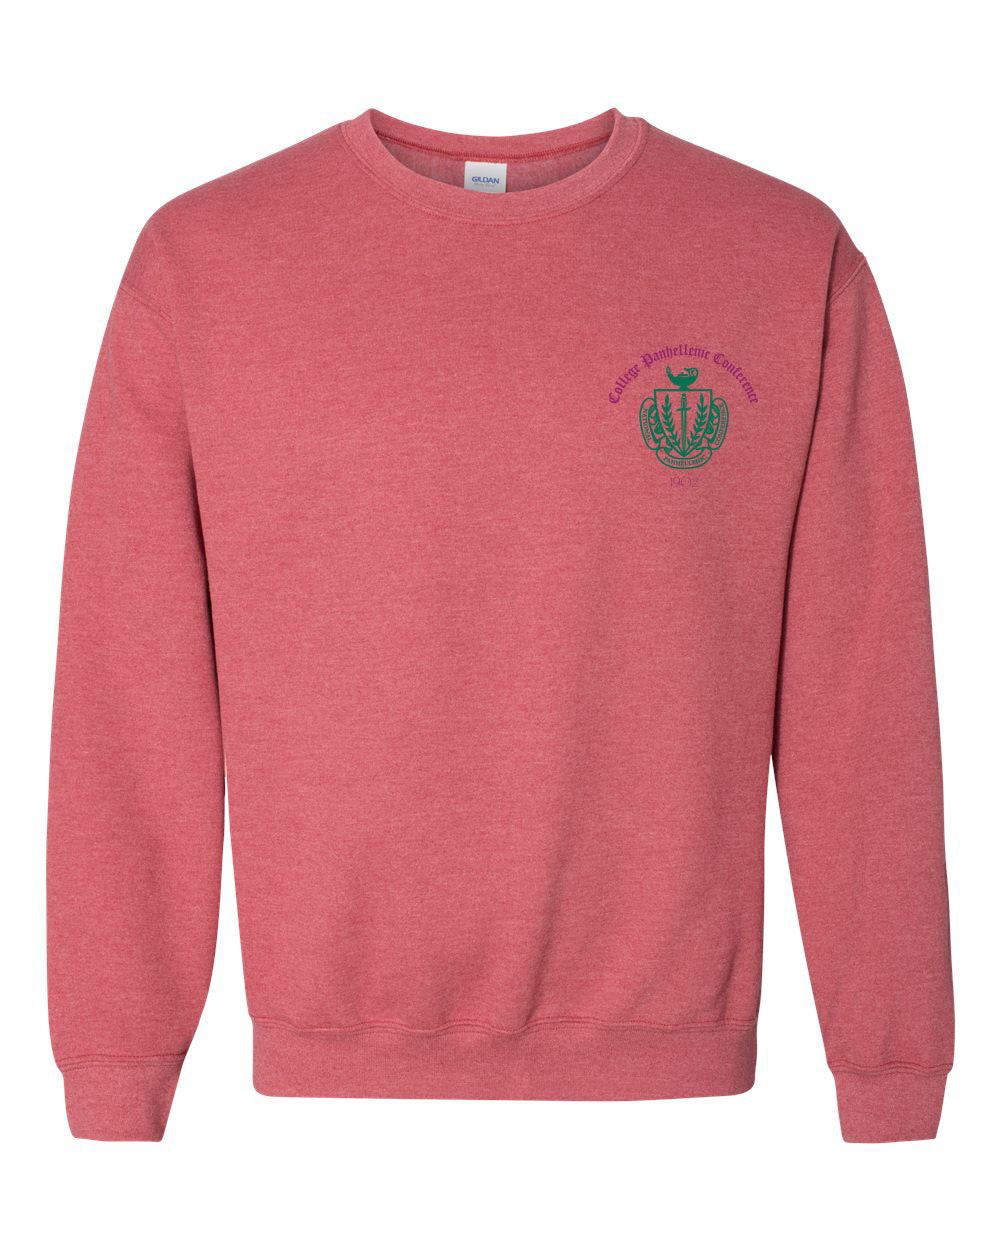 a red sweatshirt with a crest on the chest